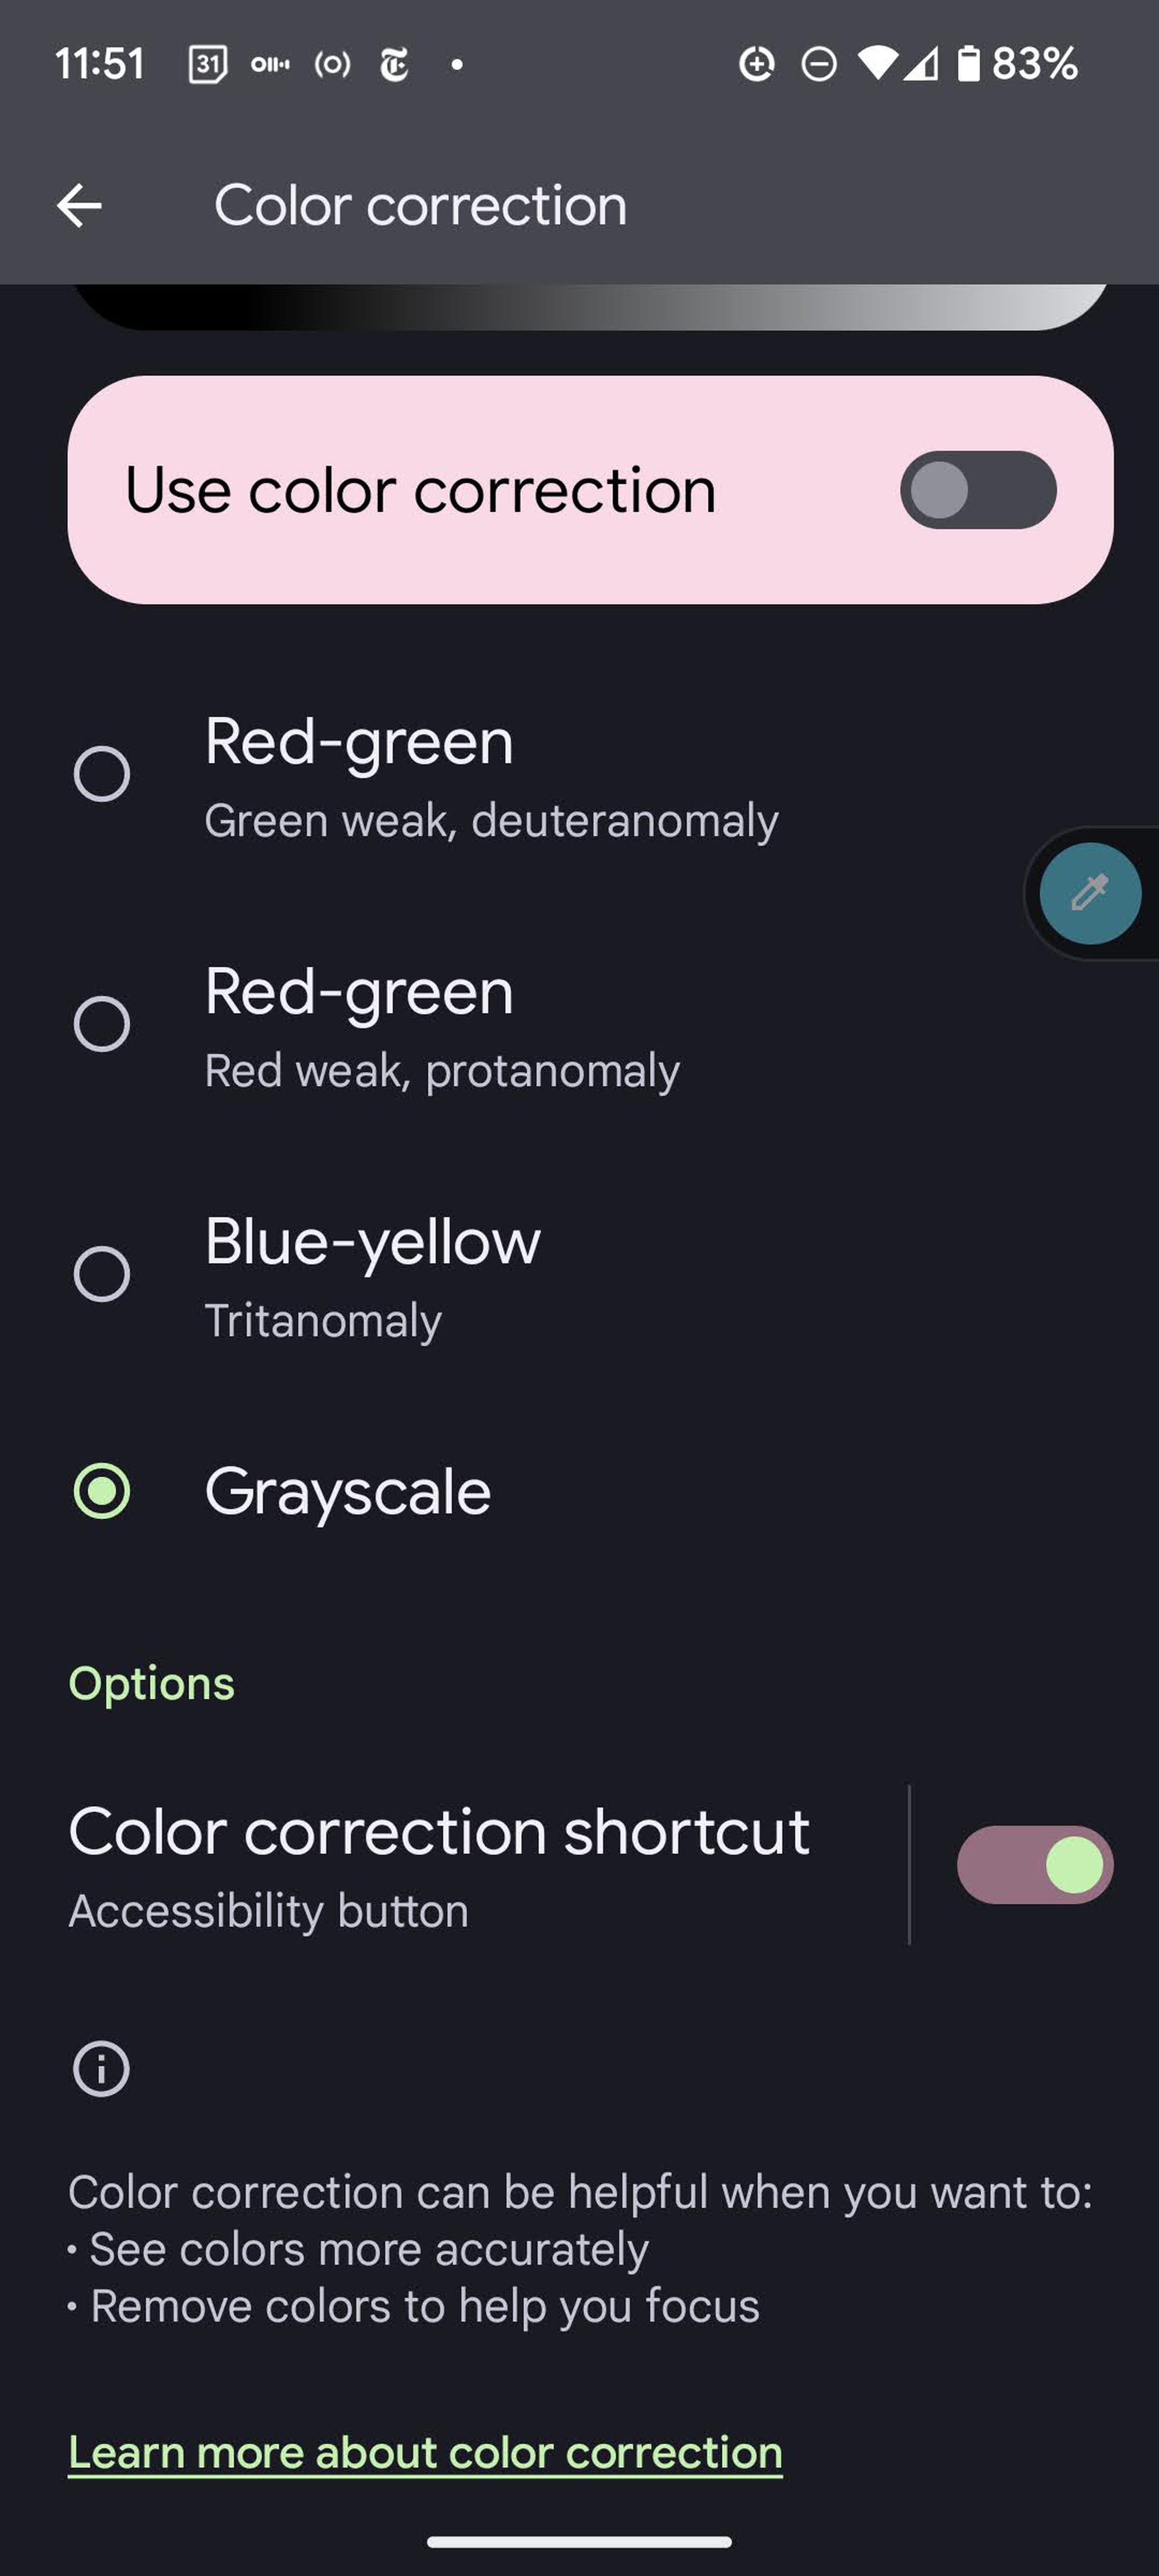 Color correction screen with “Use color correction” button in pink, and other choices including red-green, blue-yellow, and grayscale.